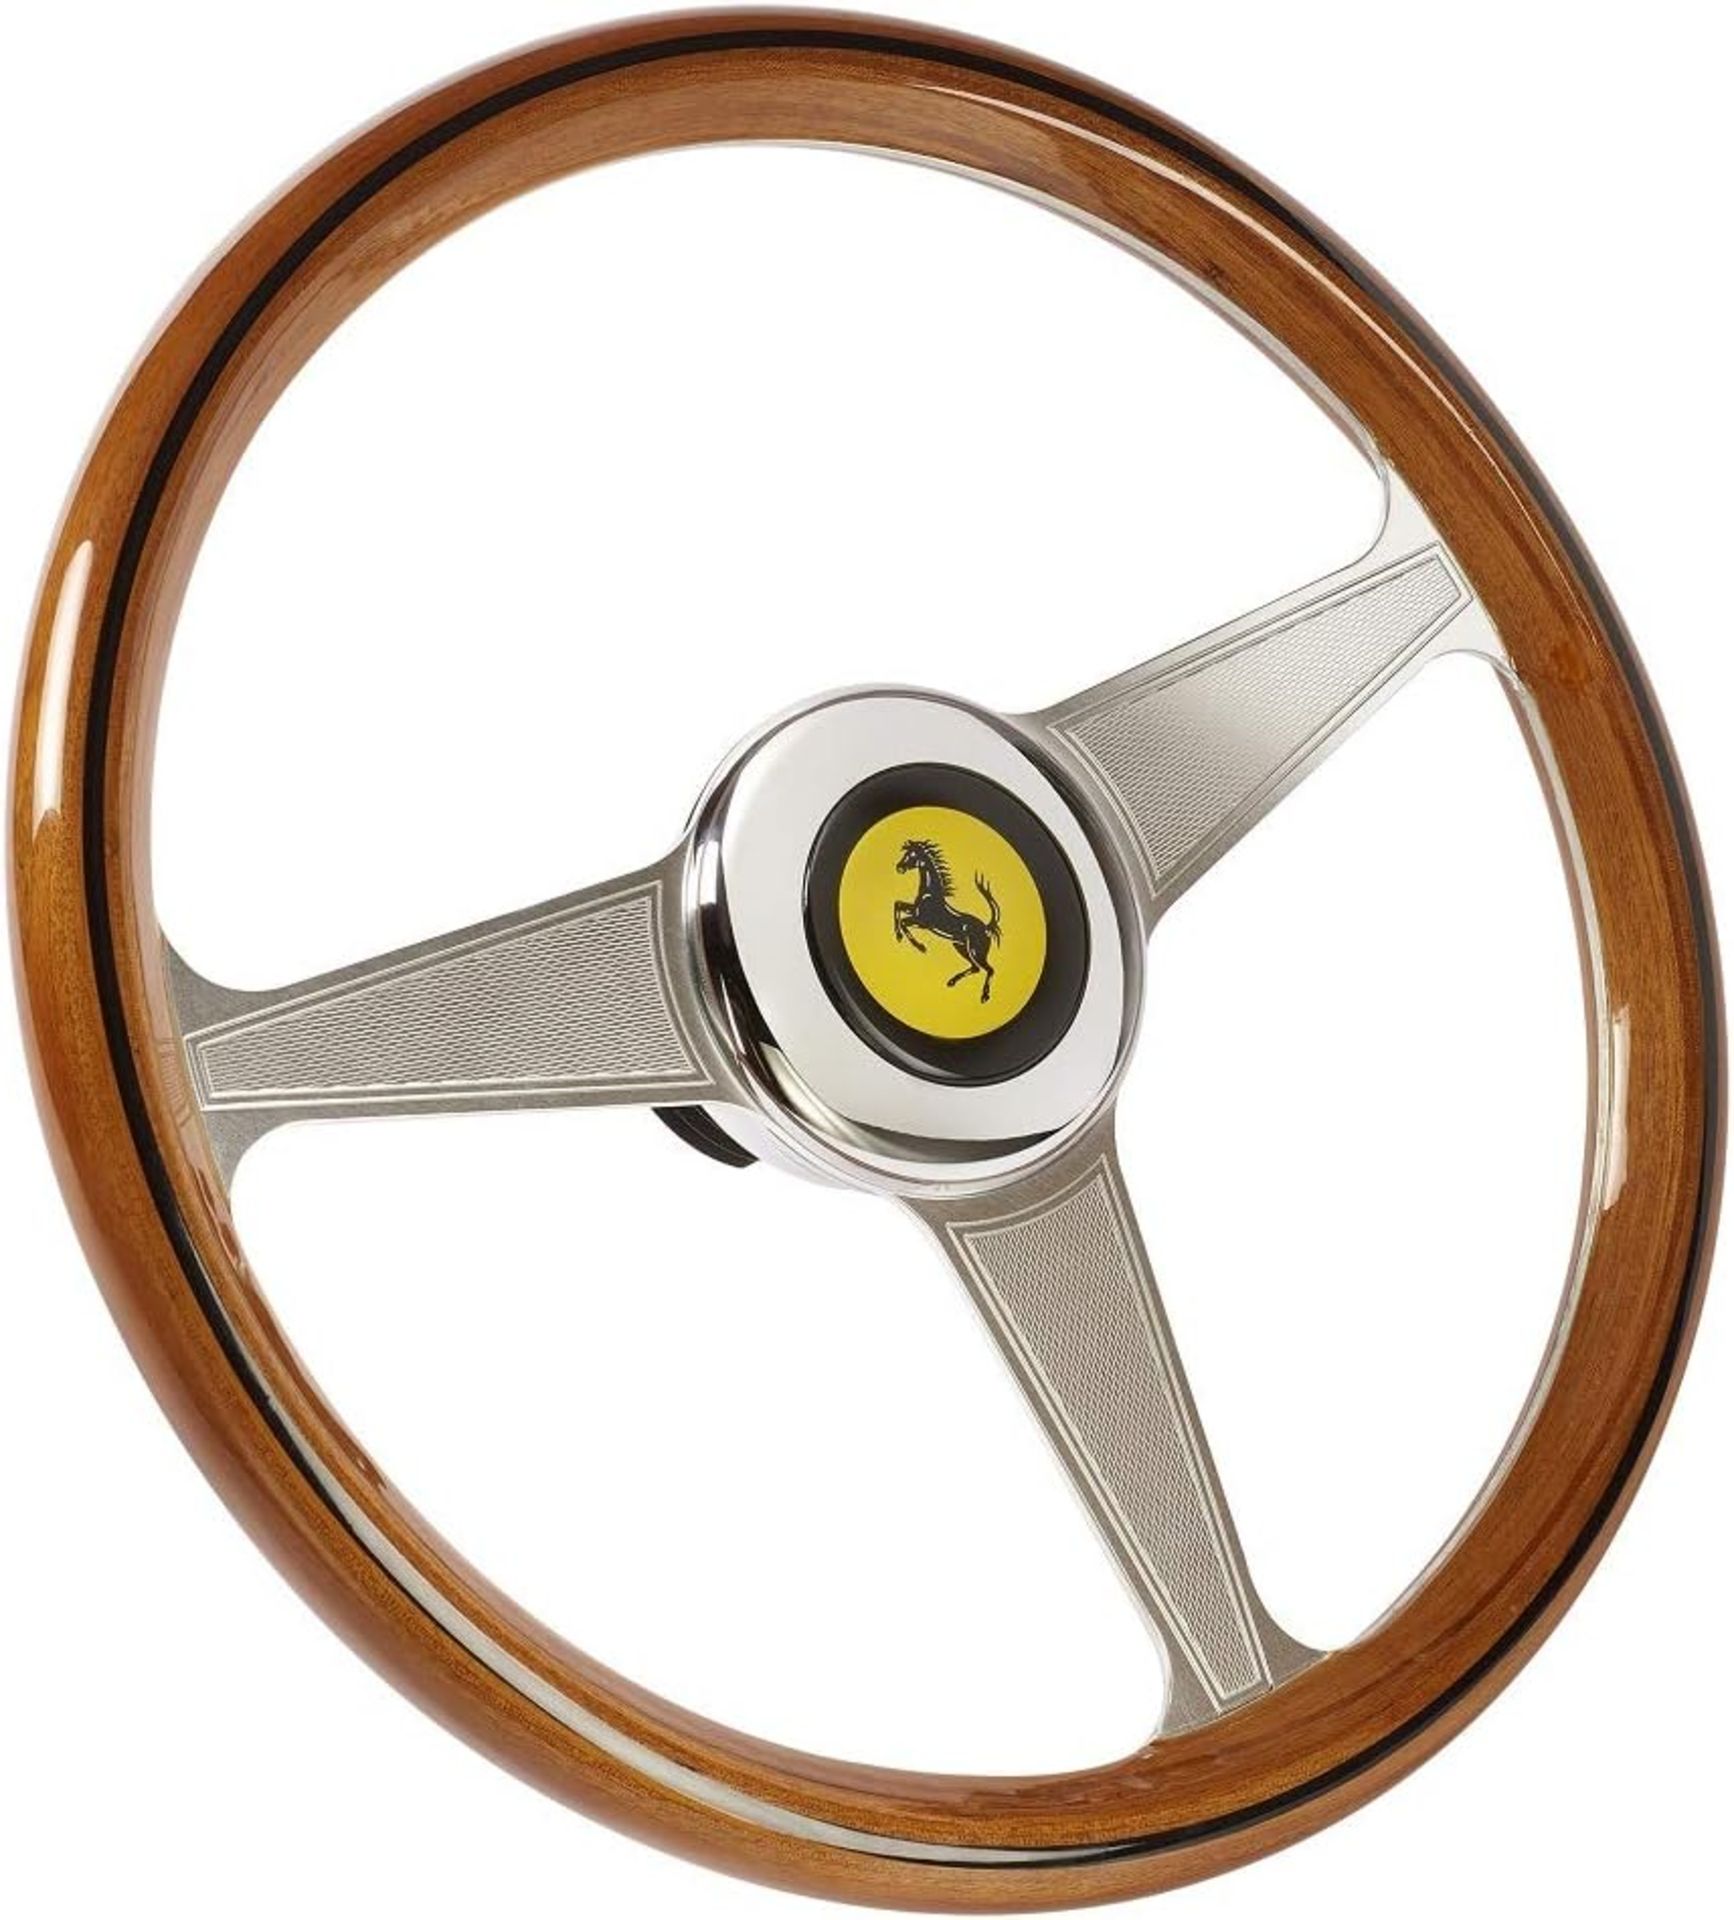 NEW & BOXED THRUSTMASTER FERRARI 250 GTO Wheel Add On. RRP £344.99. Officially licensed by - Image 4 of 4